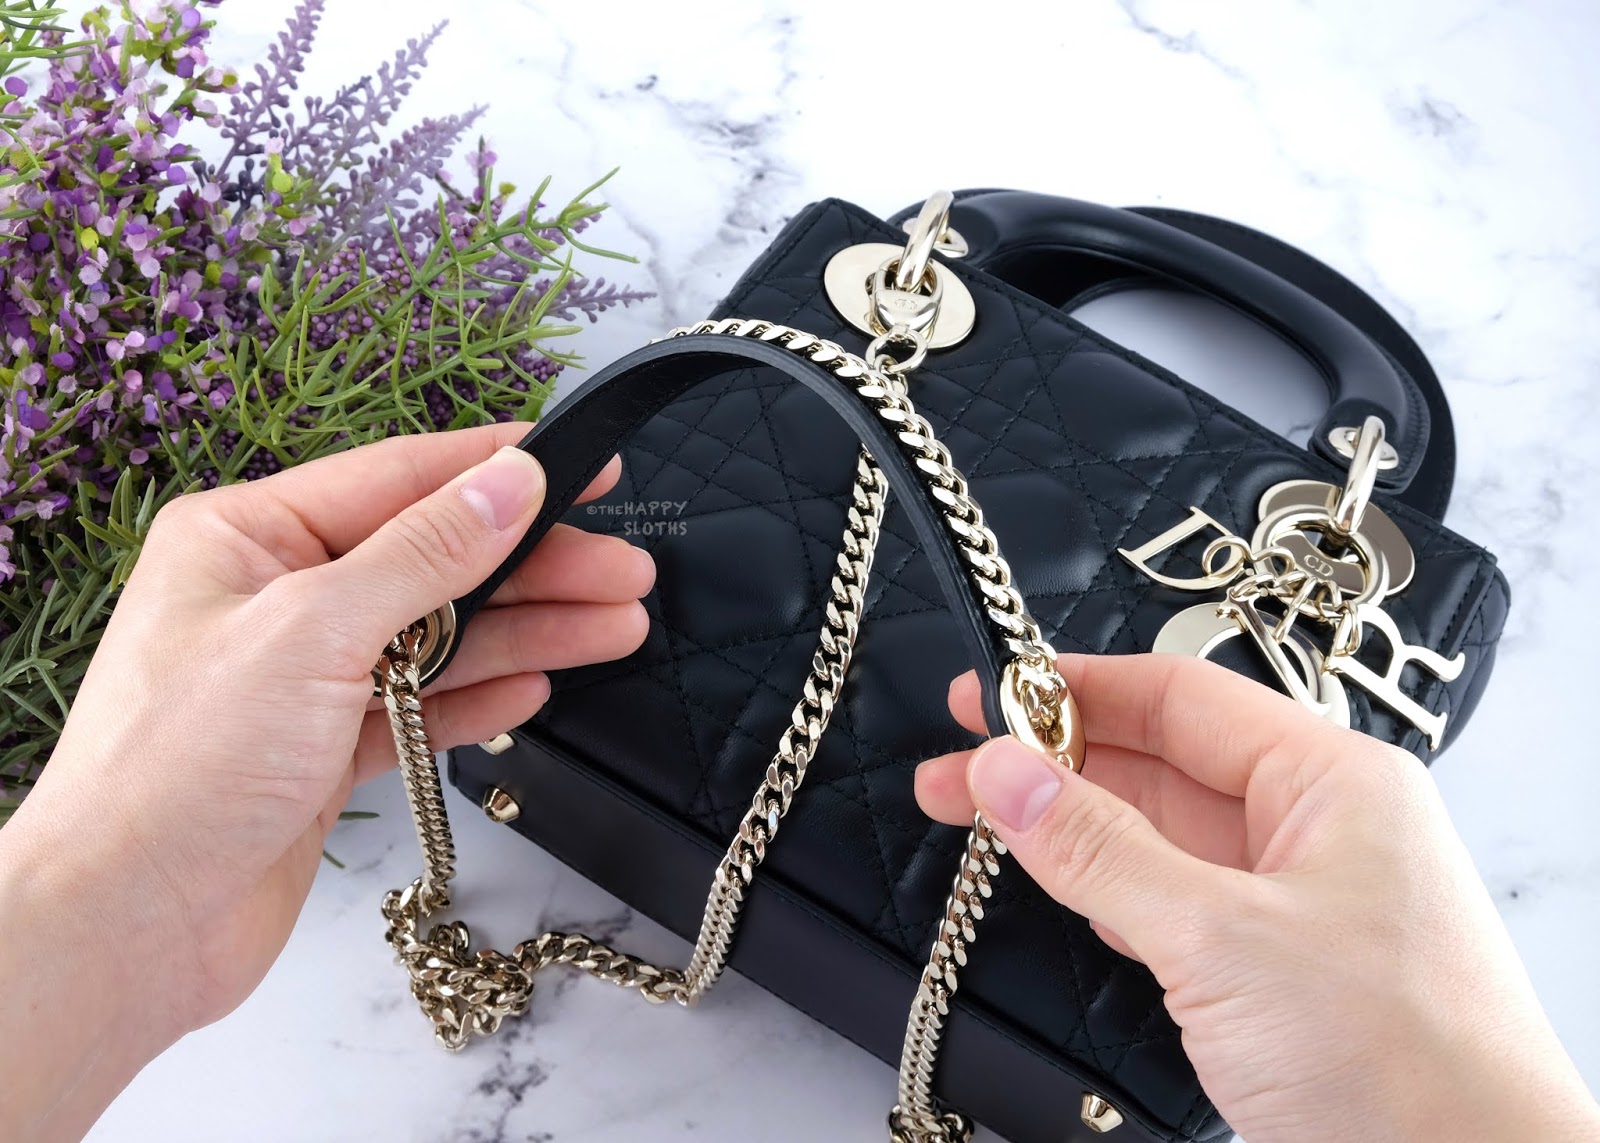 Dior | Mini Lady Dior Lambskin Bag in Black with Light Gold Hardware: Review